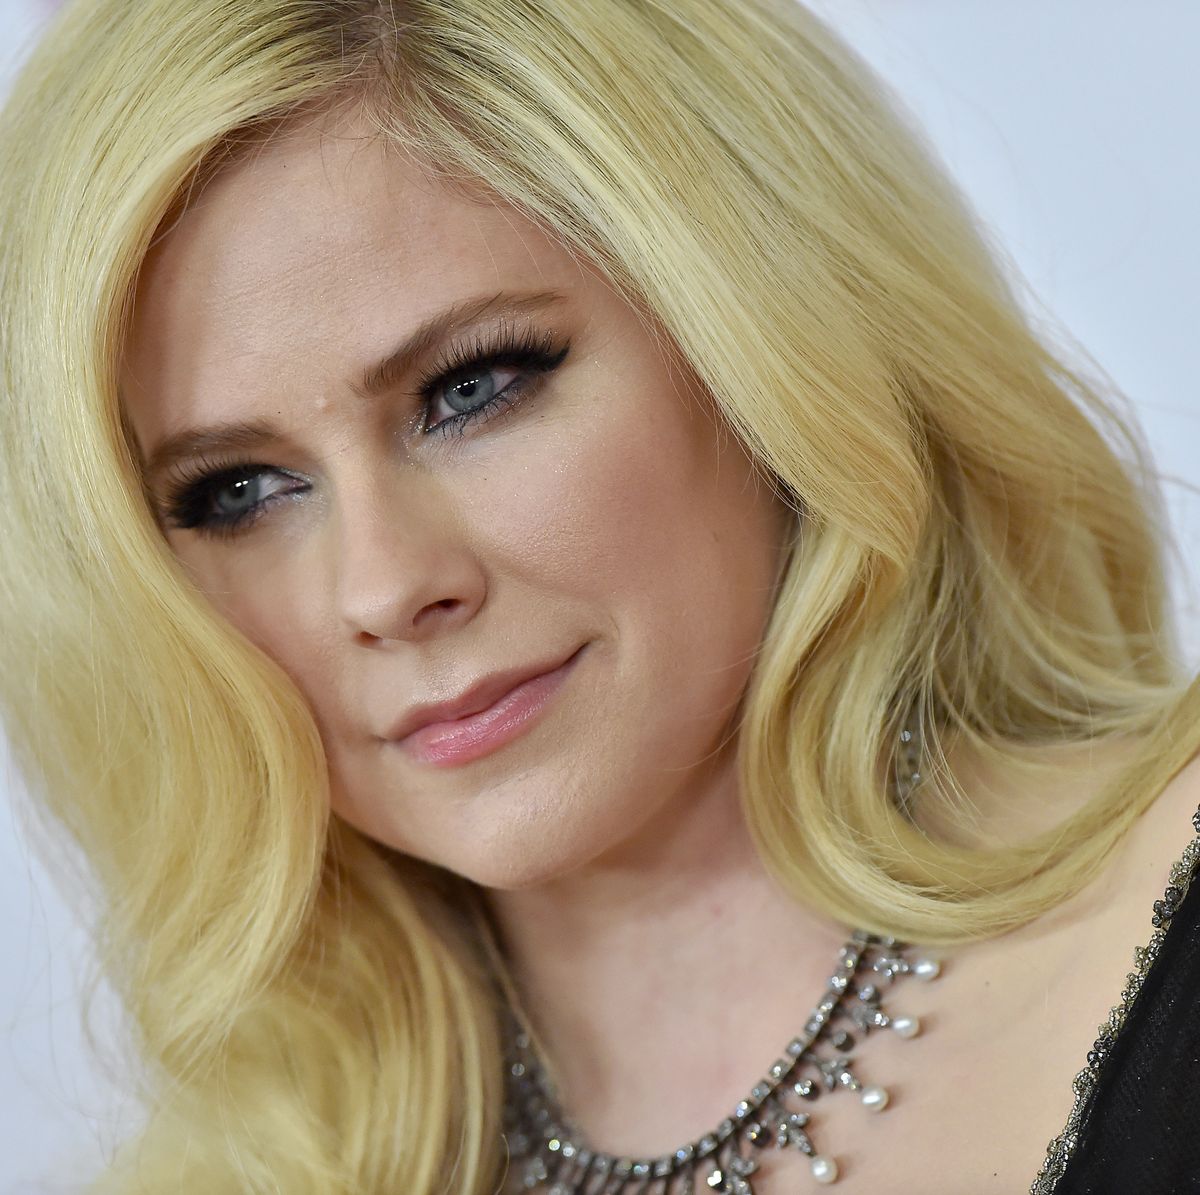 Avril Lavigne on Growing Up and Staying Young